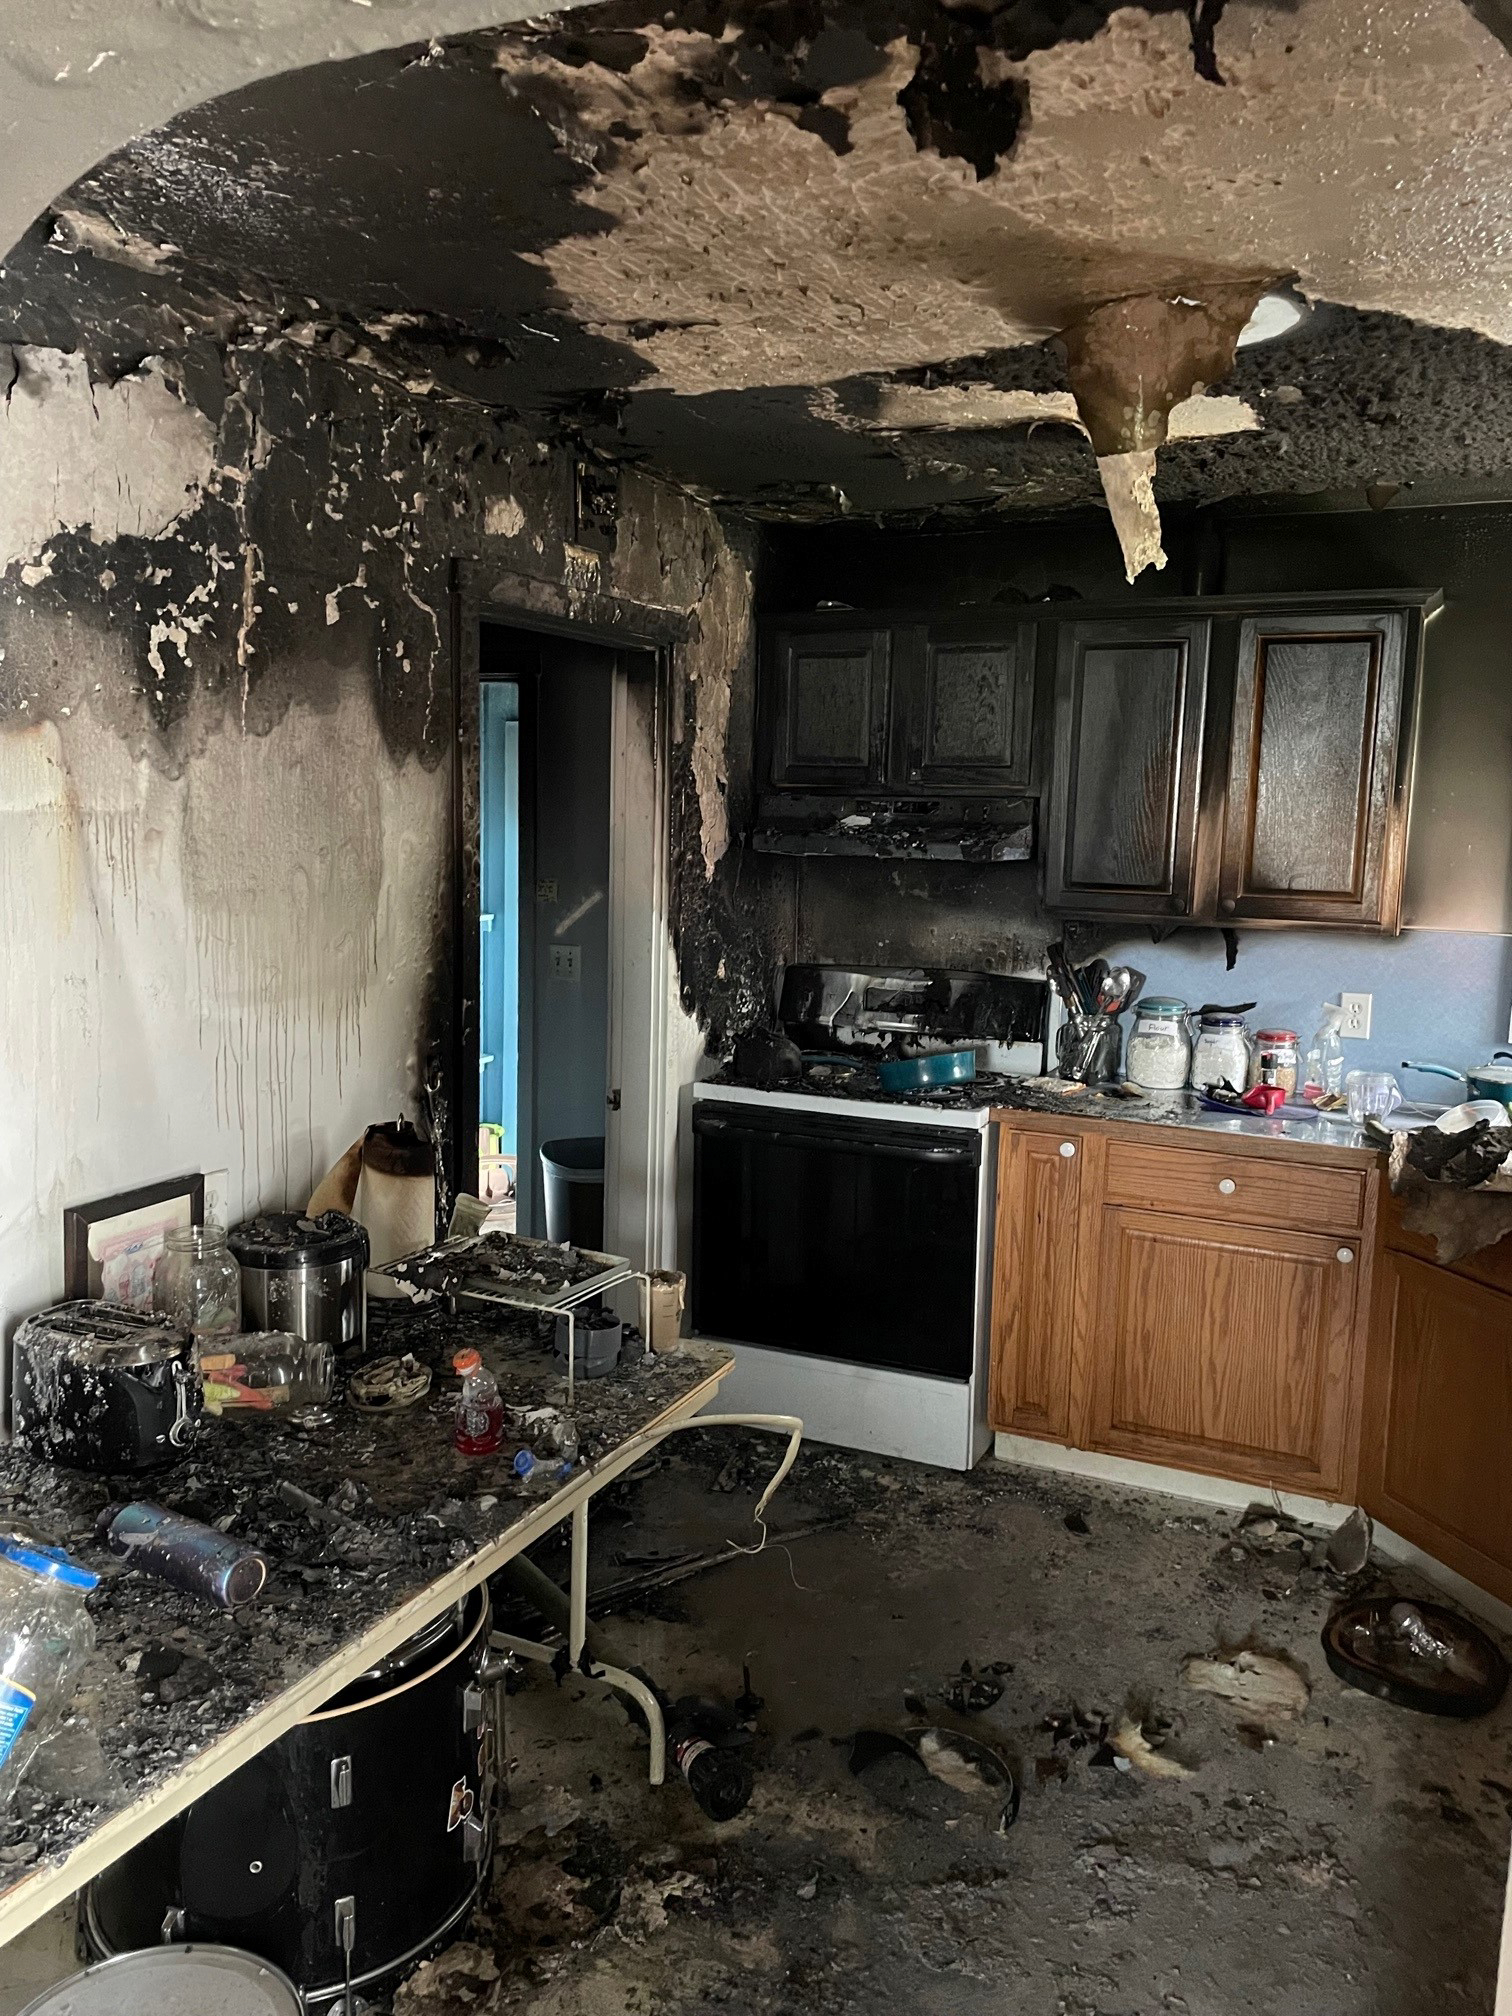 Clark-Cowlitz Fire Rescue firefighters extinguished a kitchen fire Wednesday afternoon that started on a stovetop and spread to cabinets and an adjacent living room in Woodland.